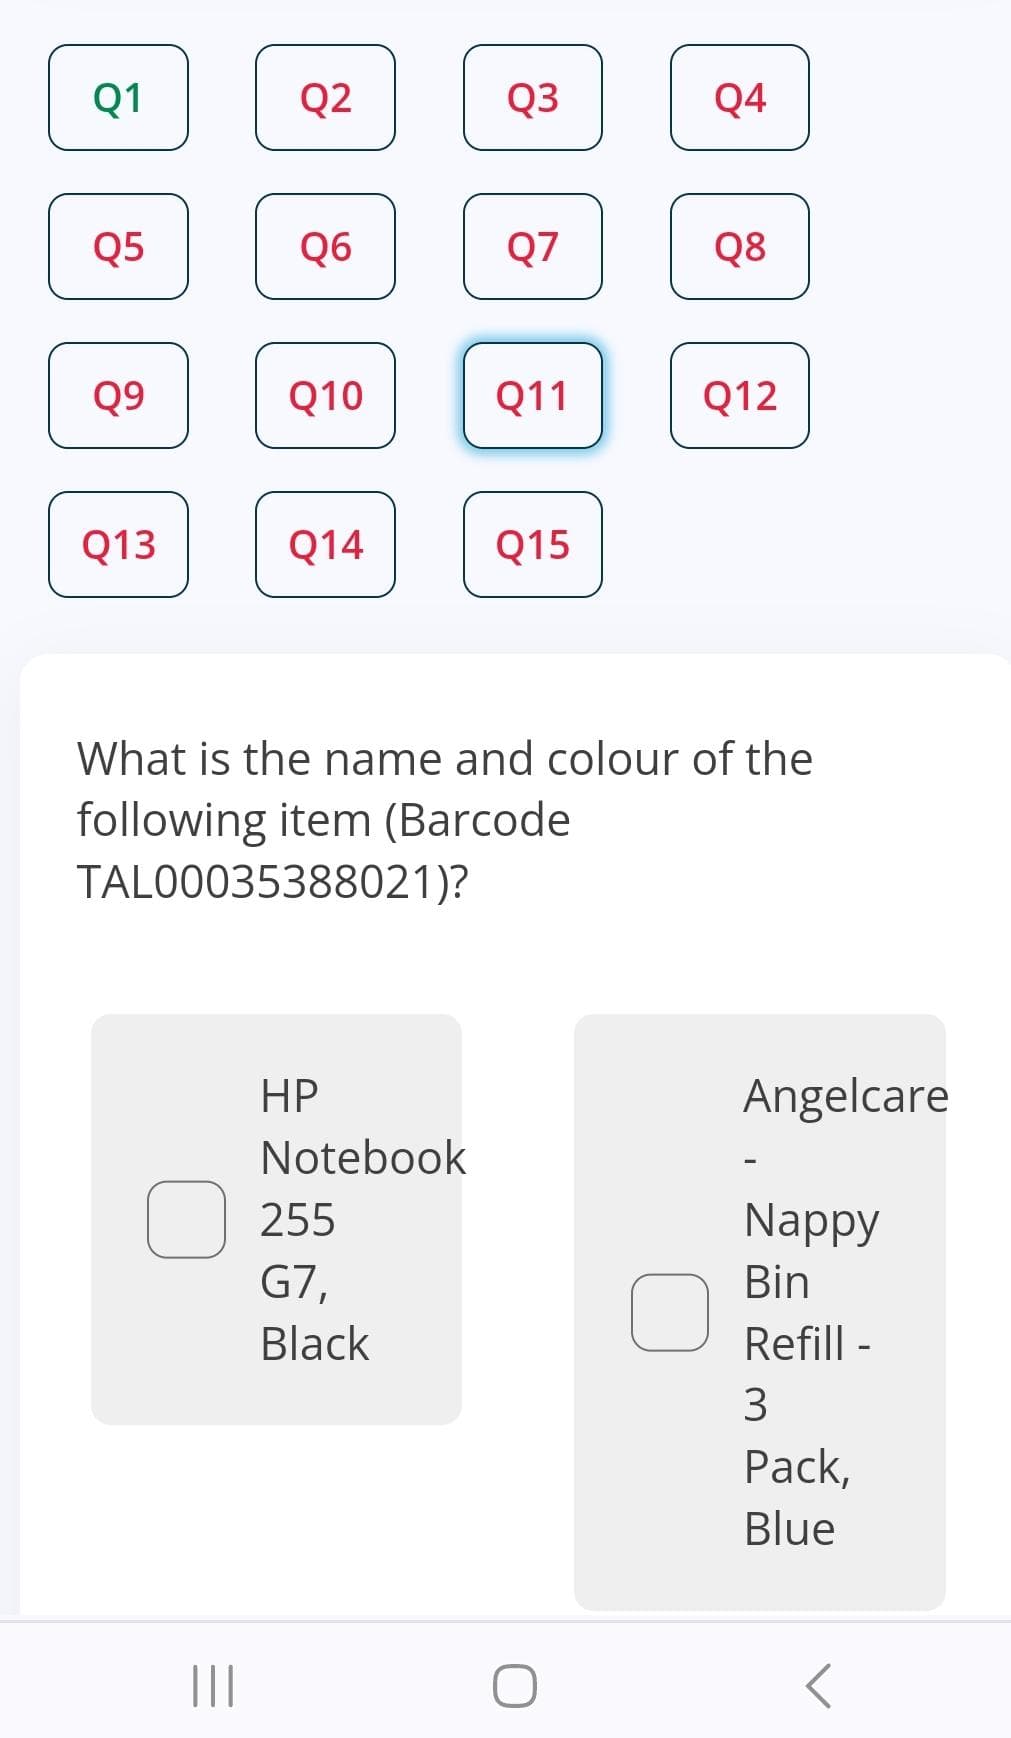 Q1
Q5
Q9
Q13
Q2
|||
Q6
Q10
Q14
HP
Notebook
255
G7,
Q3
Black
Q7
Q11
Q15
What is the name and colour of the
following item (Barcode
TAL00035388021)?
Q4
O
Q8
Q12
Angelcare
Nappy
Bin
Refill -
3
Pack,
Blue
<